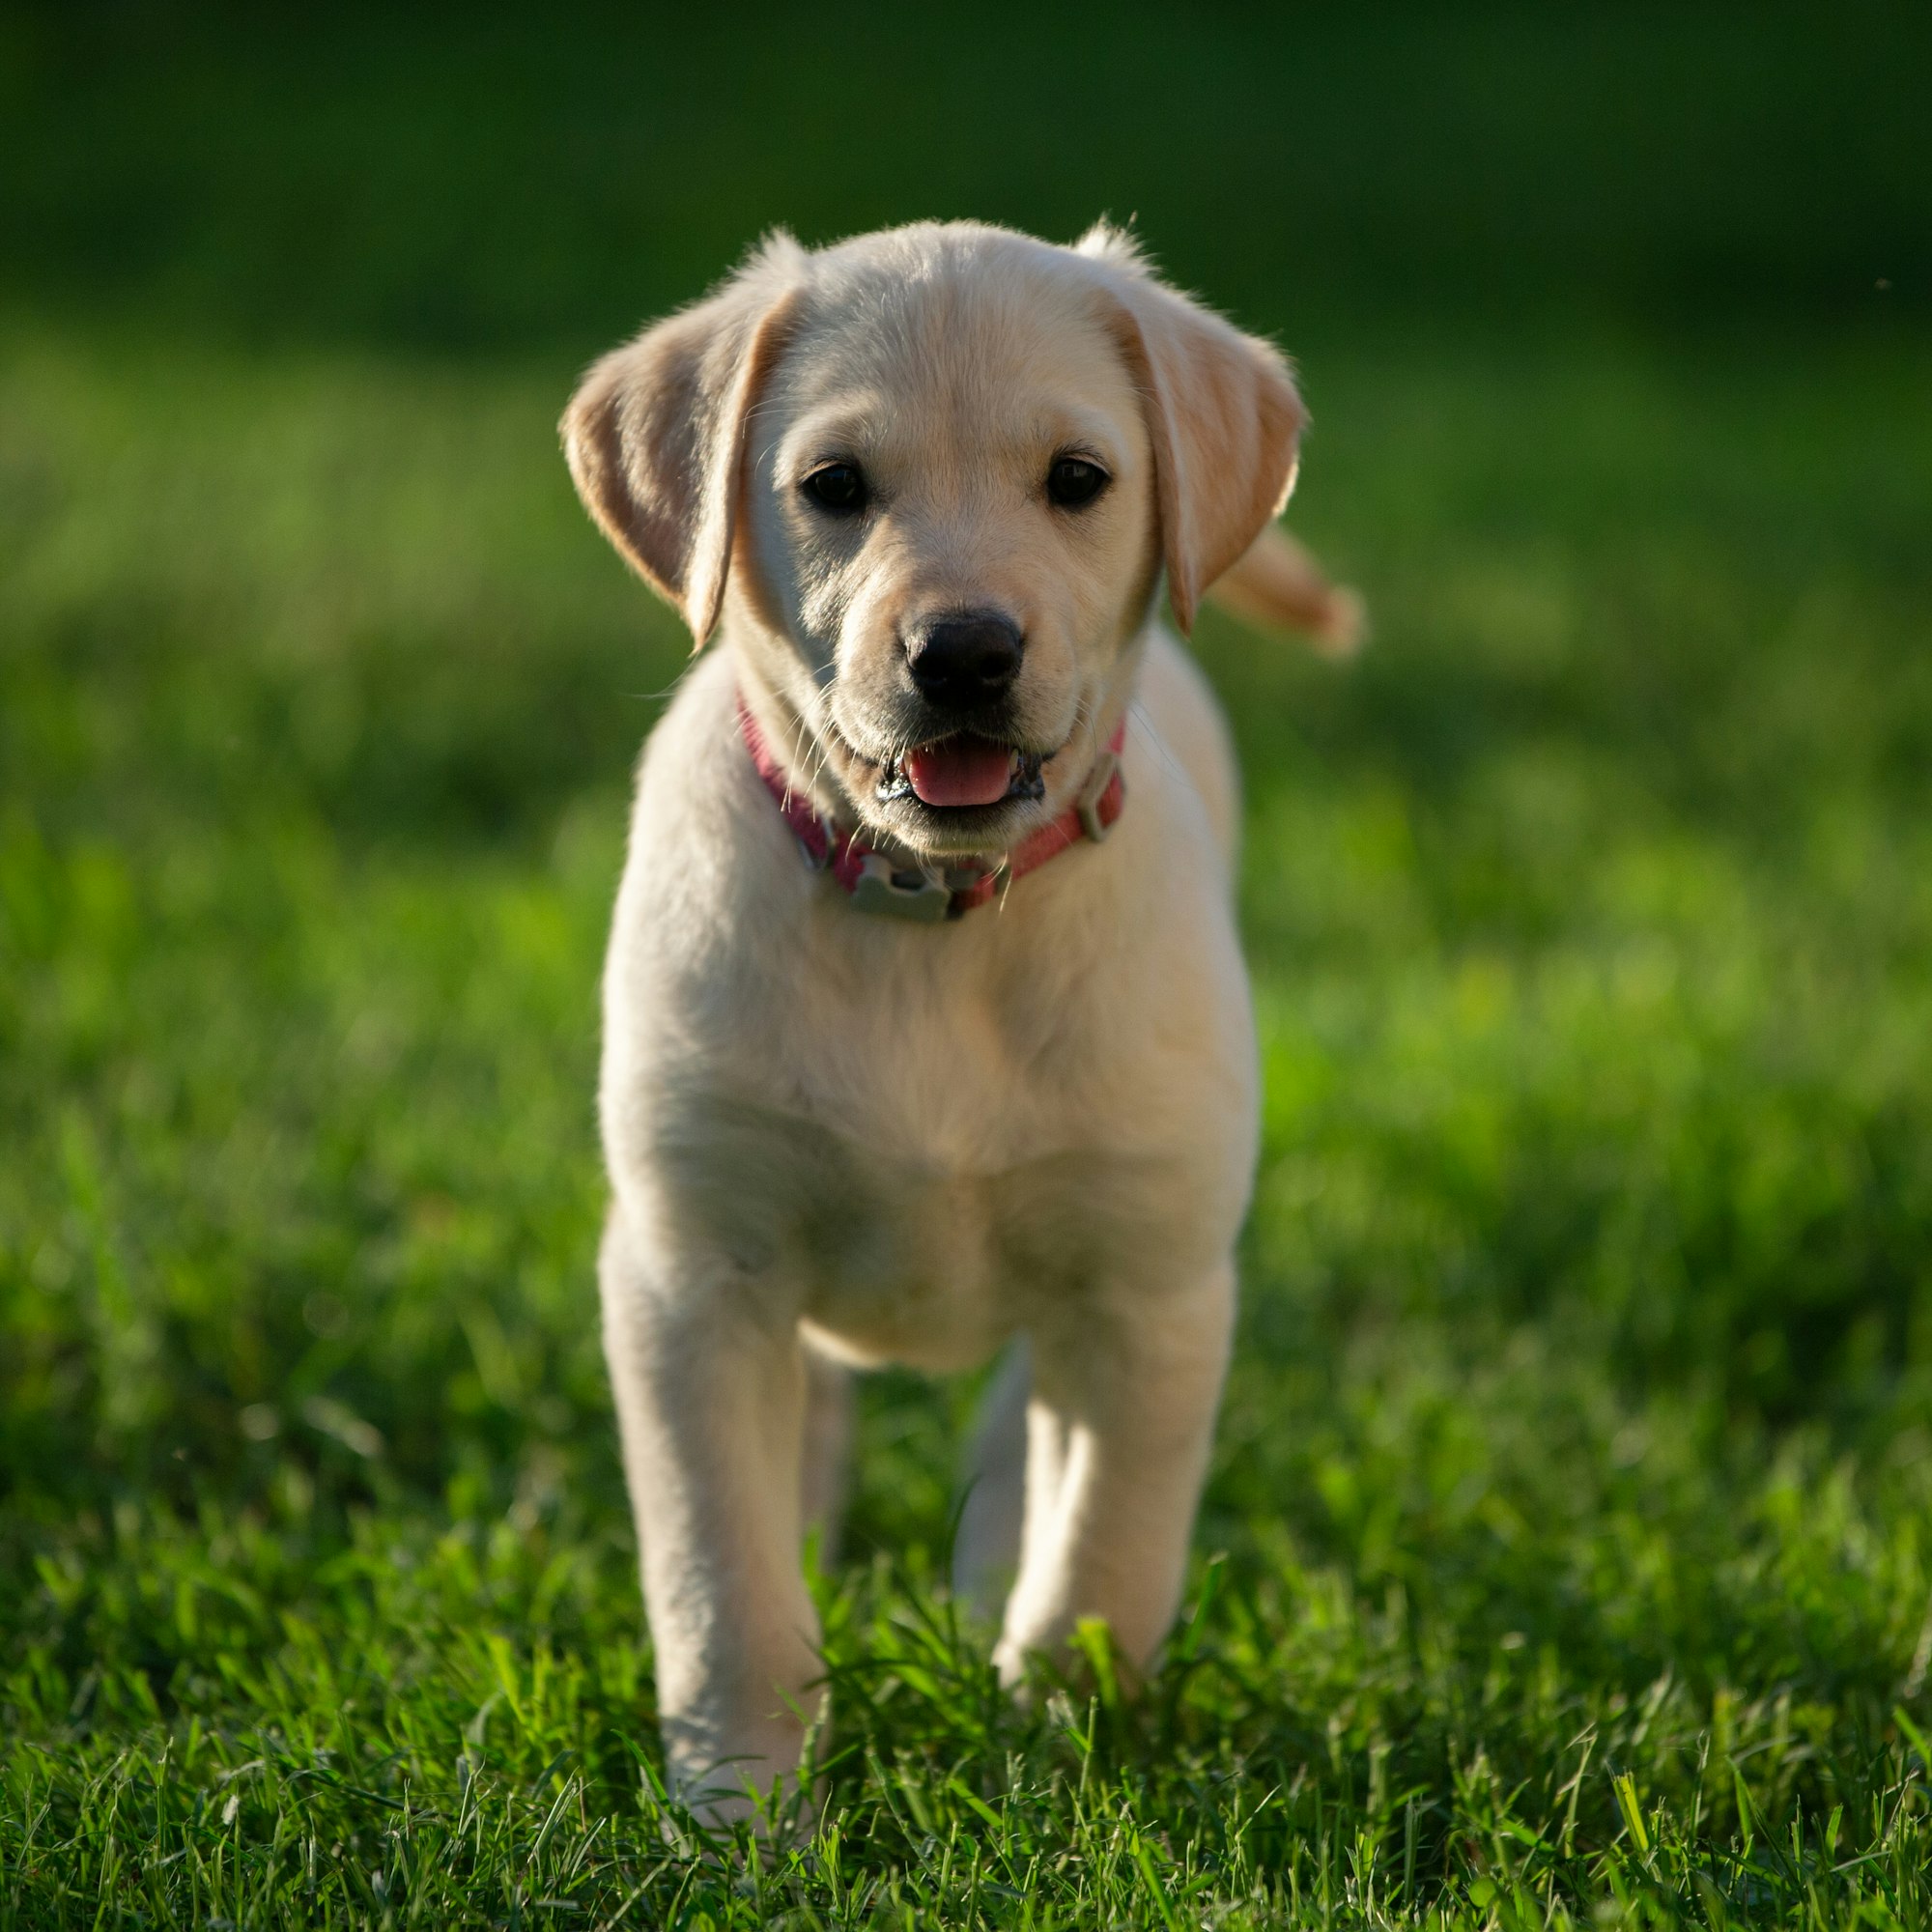 How Long Do Labs Live? The Labrador Life Expectancy